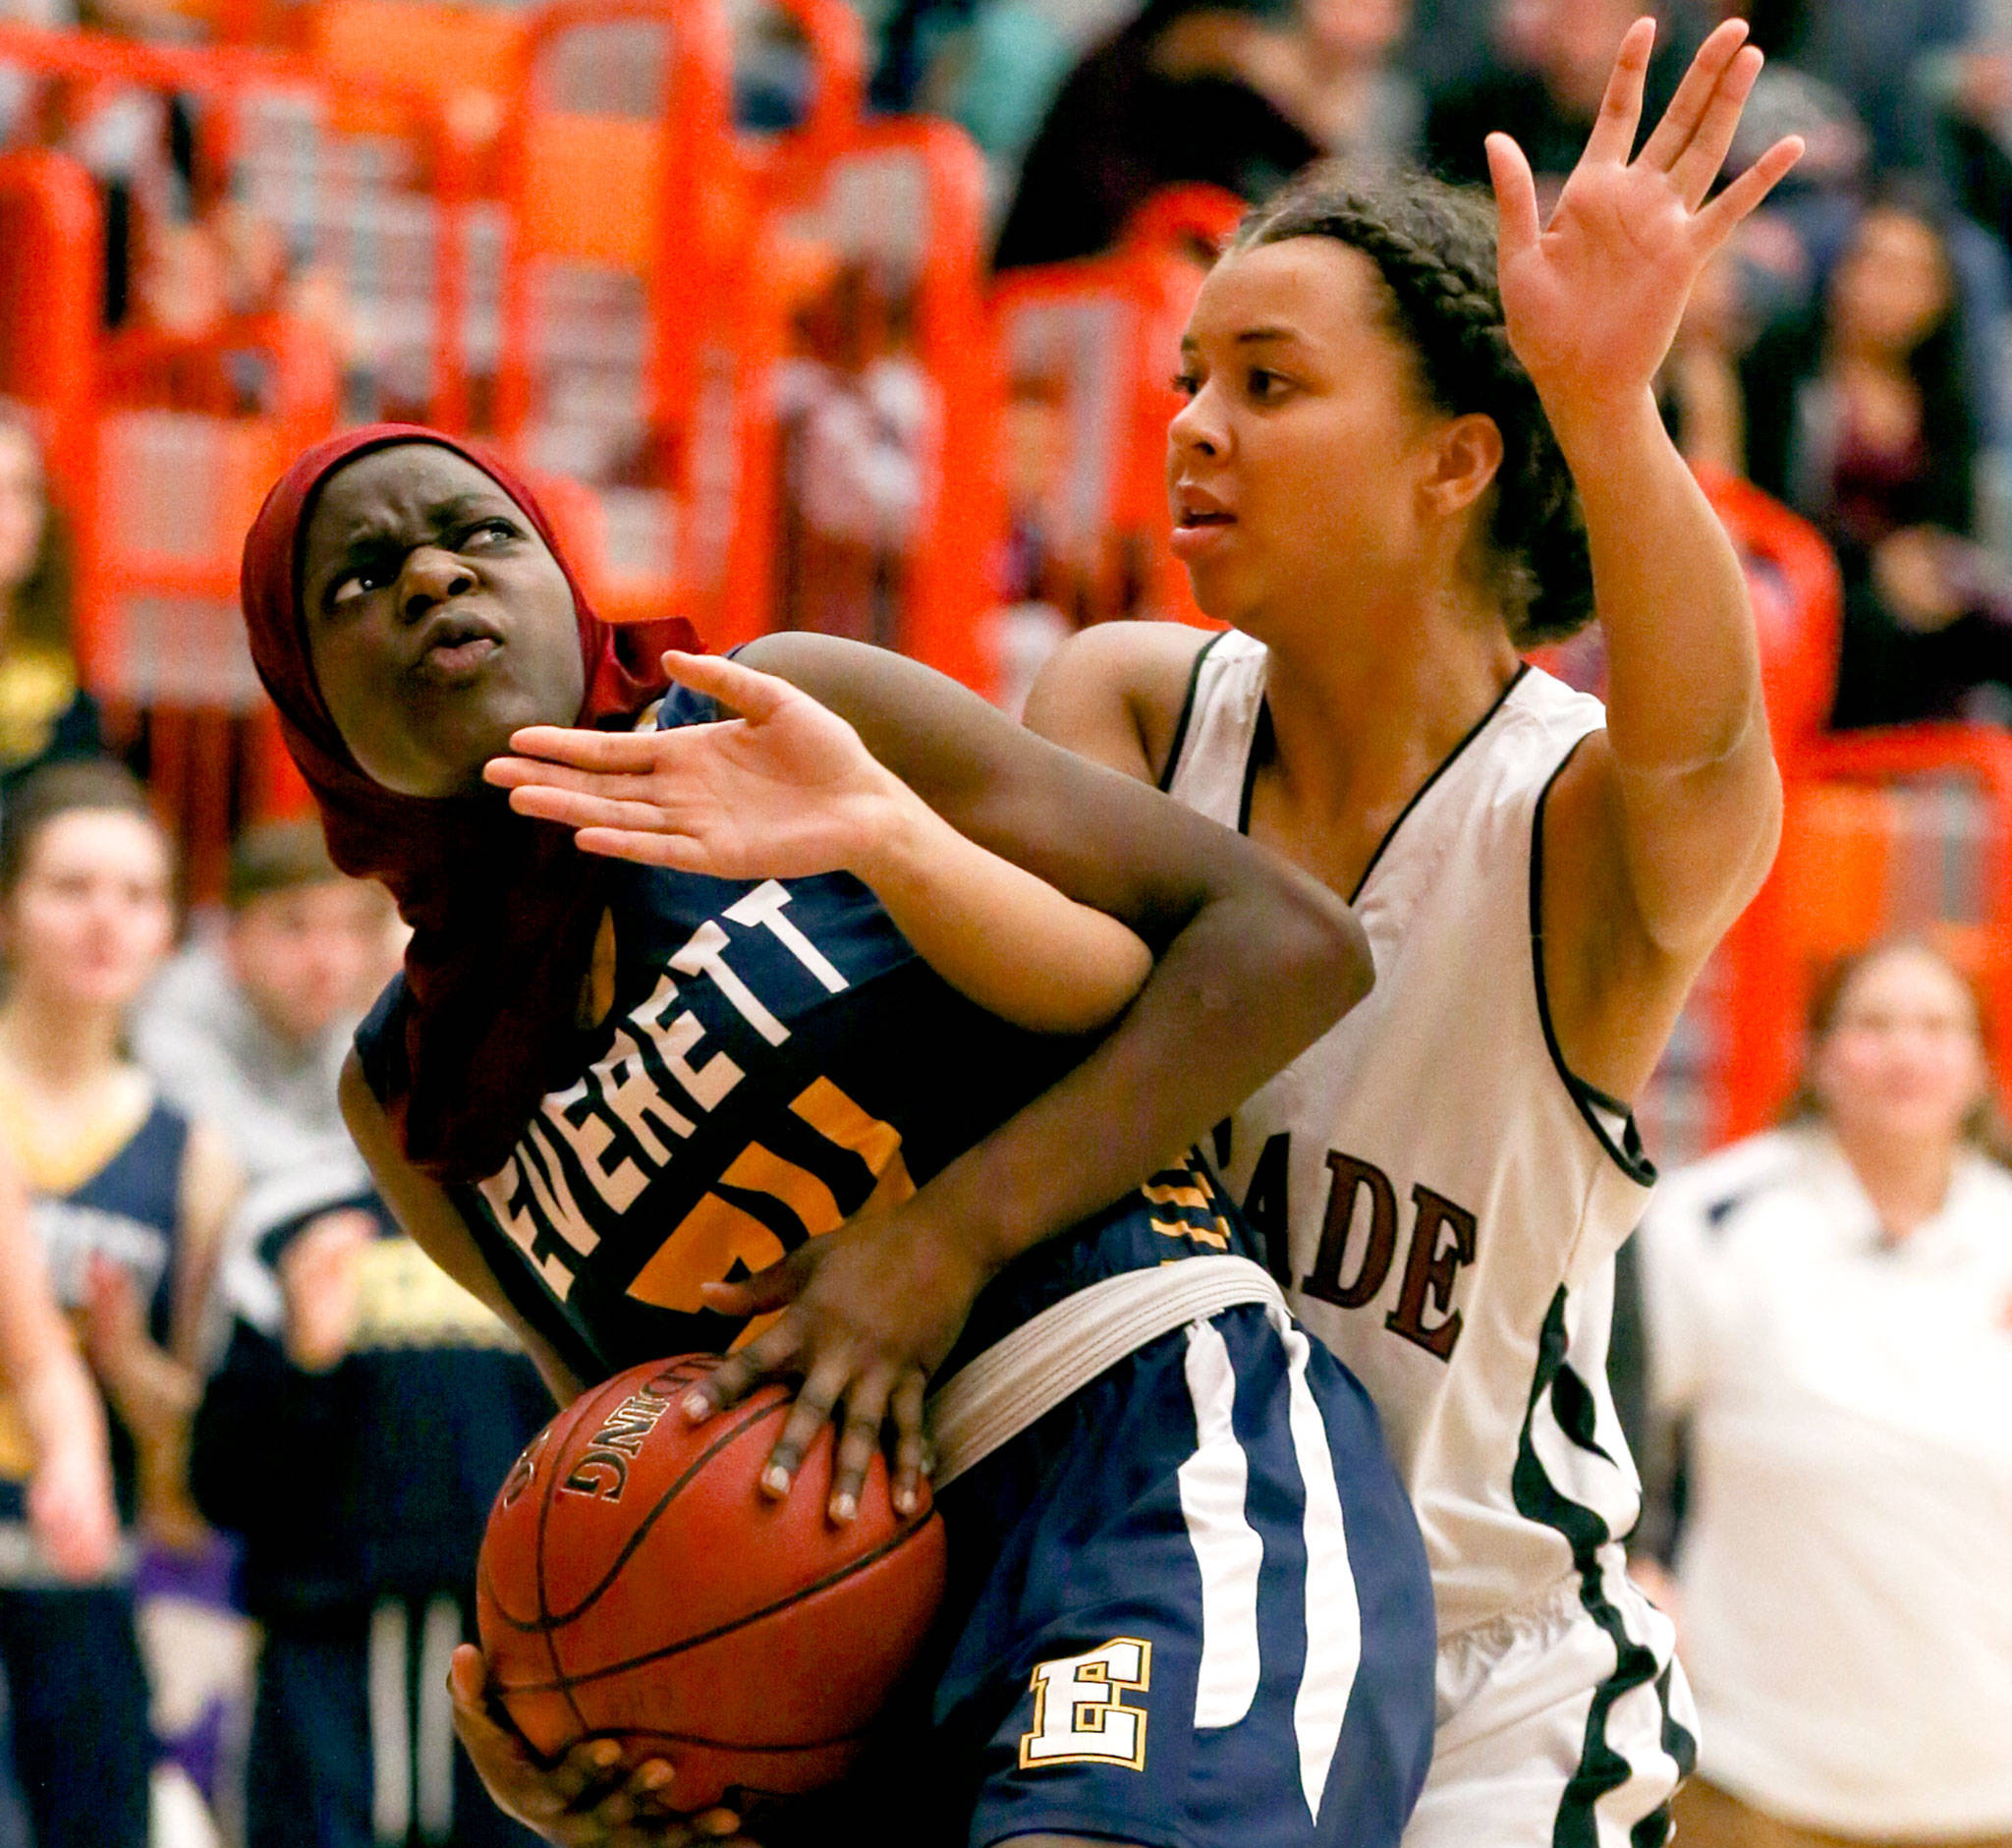 Everett’s Amina Hussein looks for her shot as Cascade’s Malia Jones defends during the girls’ varsity game at Bru-Gull Fest on Friday at Everett Community College. Hussein and the Seagulls won 50-23. (Kevin Clark / The Herald)